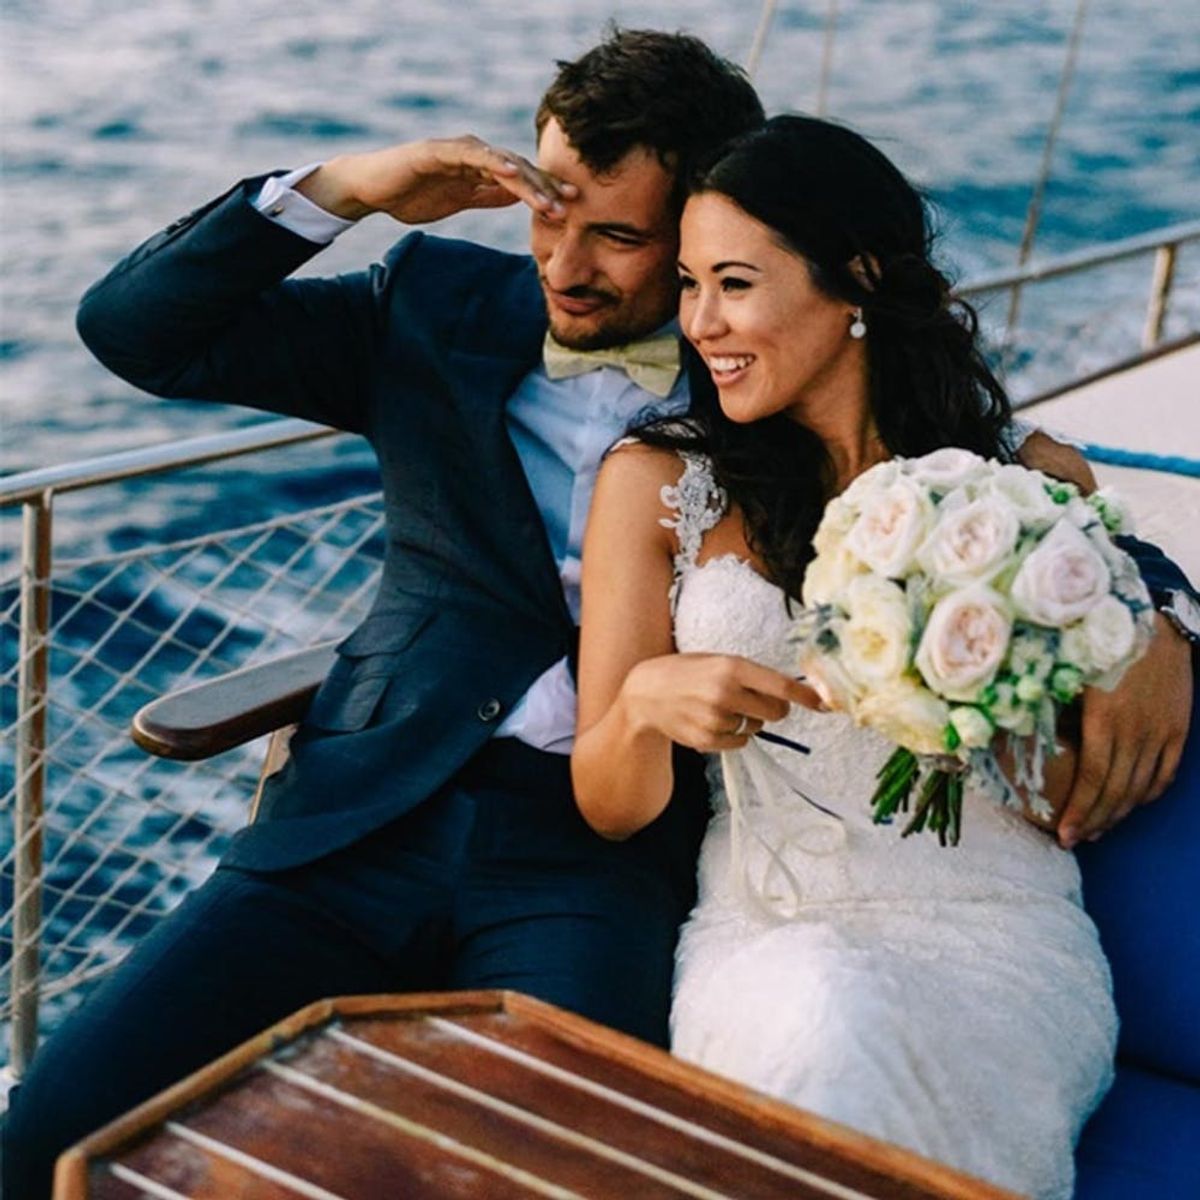 You’ll Fall in Love With This Picturesque Greek Wedding